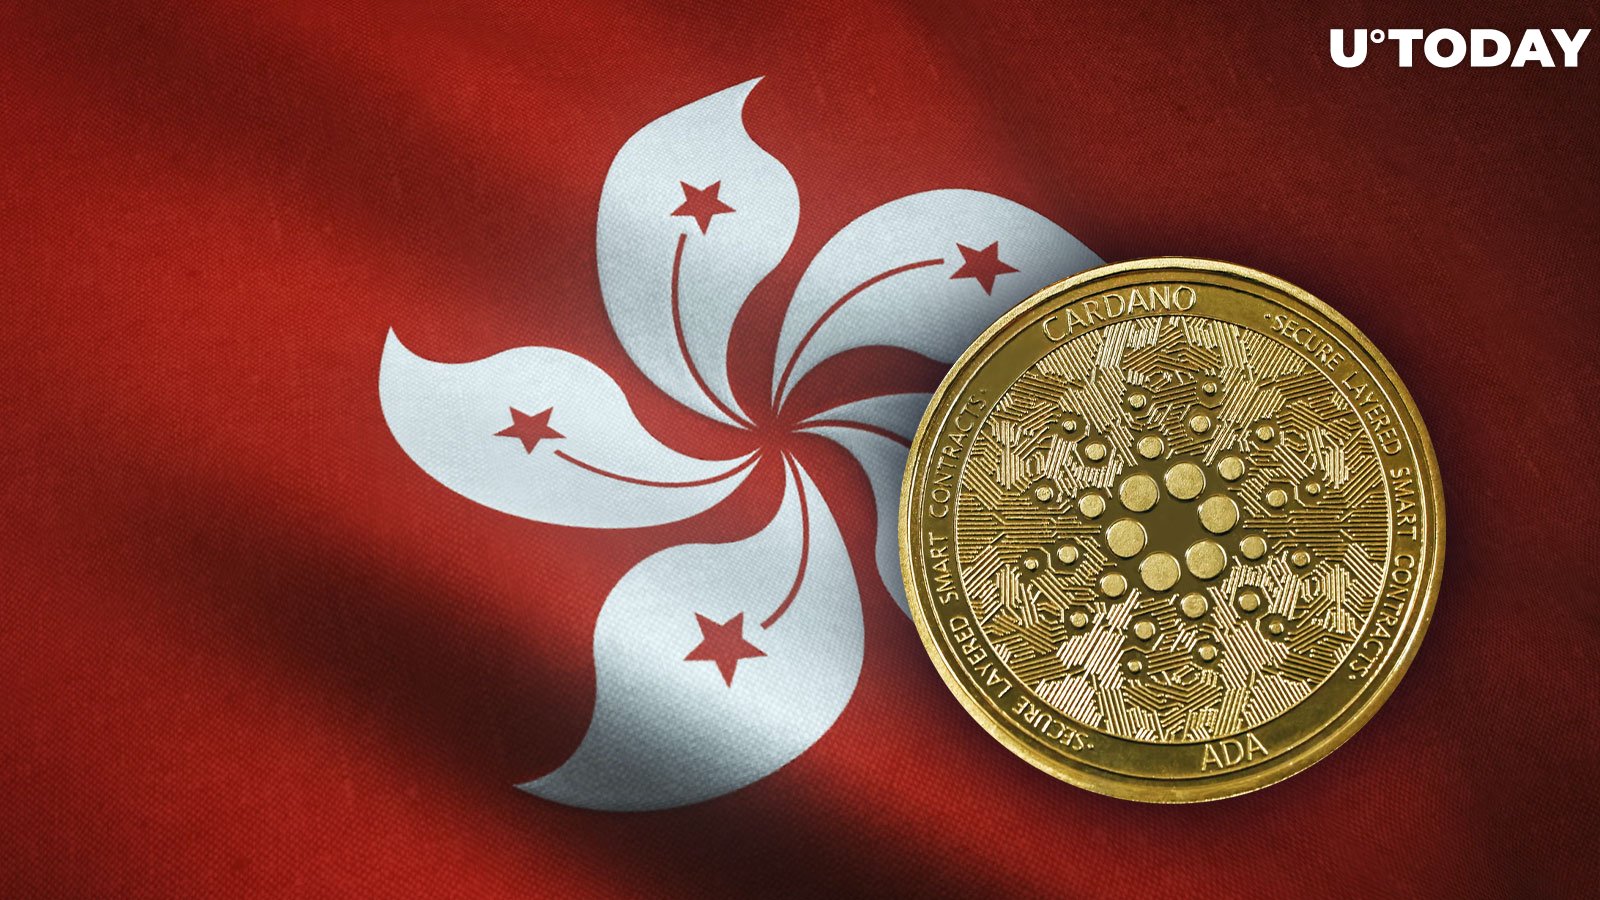 Cardano (ADA) Ready for Hong Kong: Here's Why